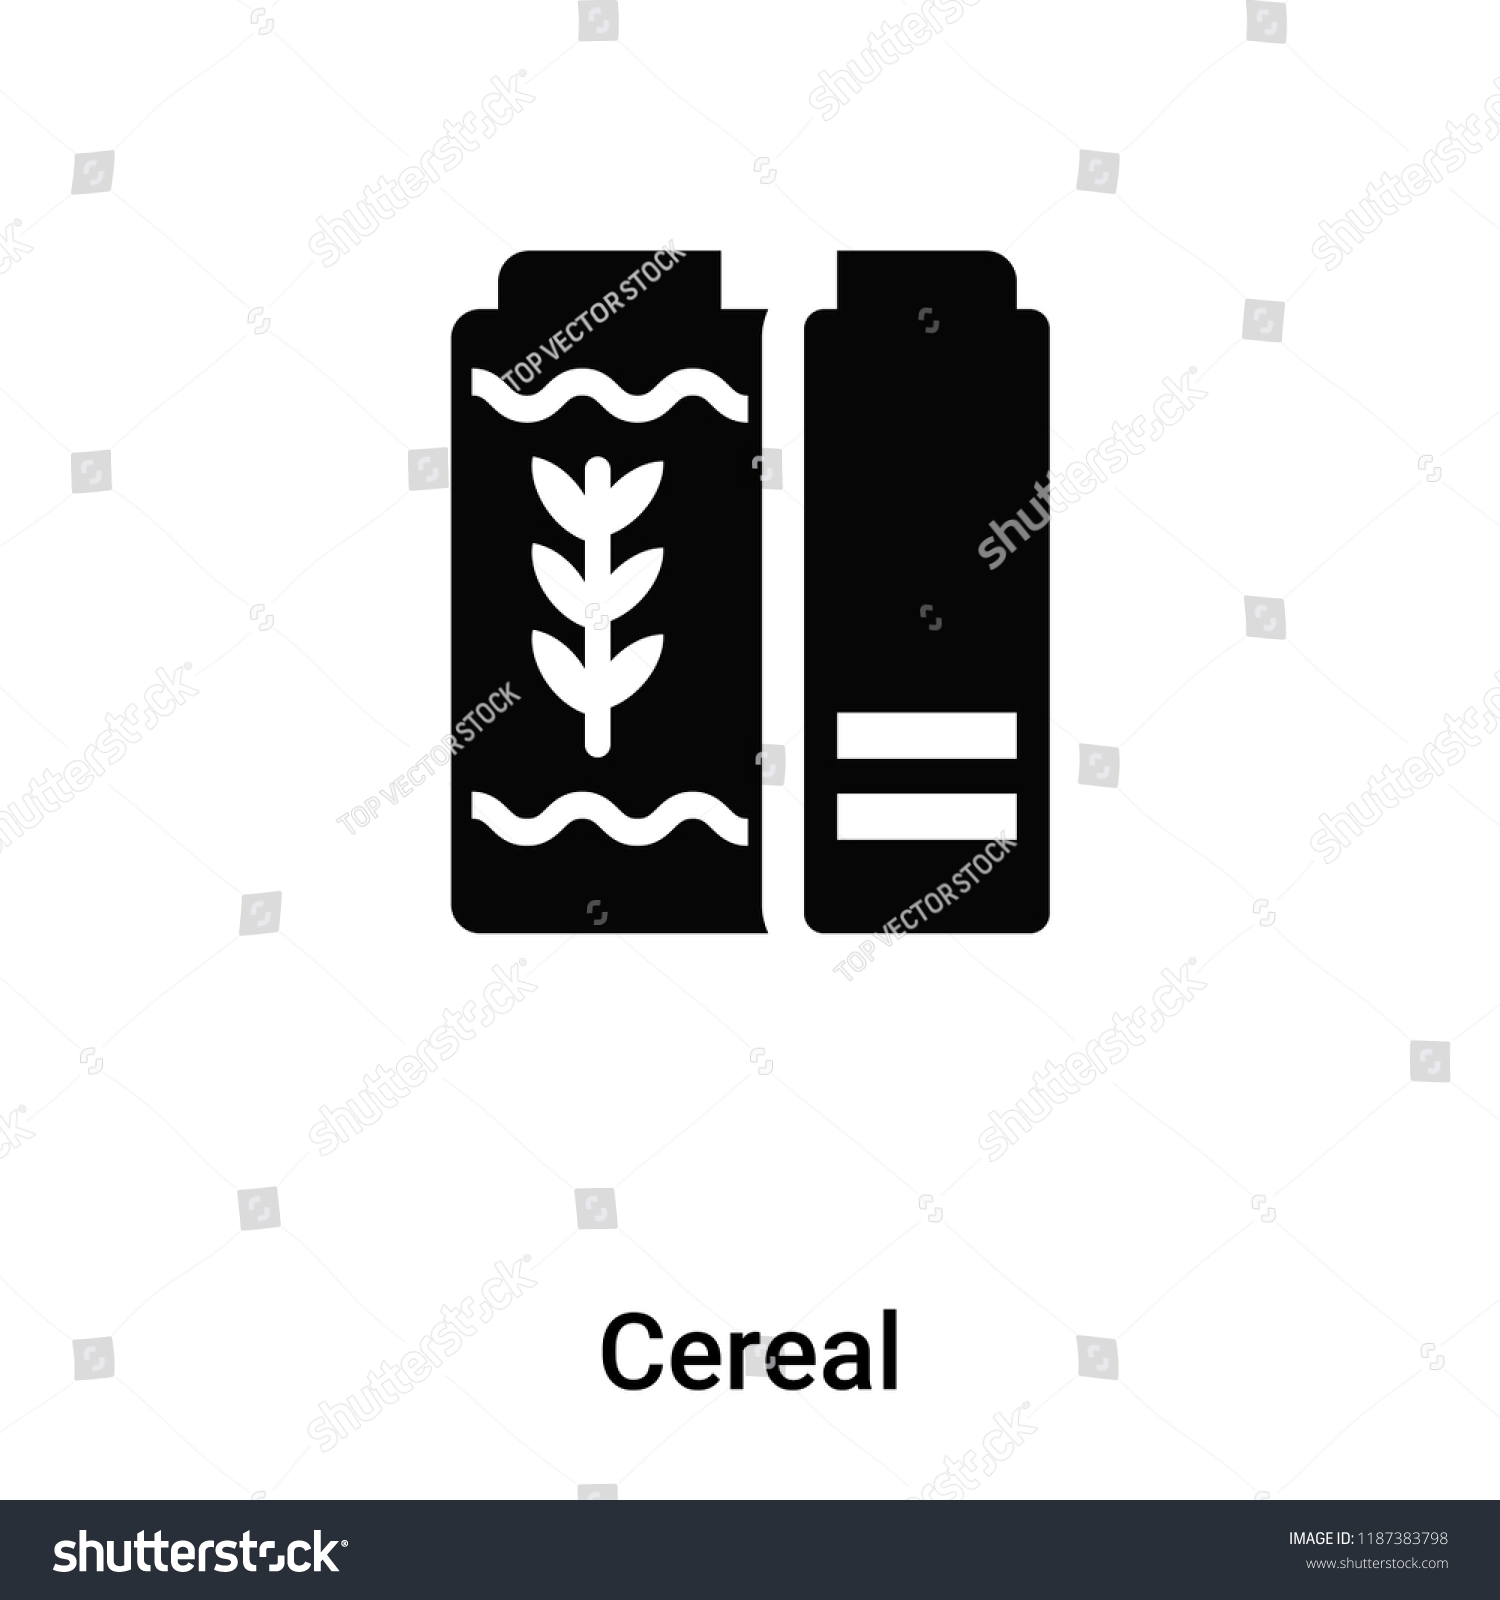 SVG of Cereal icon vector isolated on white background, logo concept of Cereal sign on transparent background, filled black symbol svg